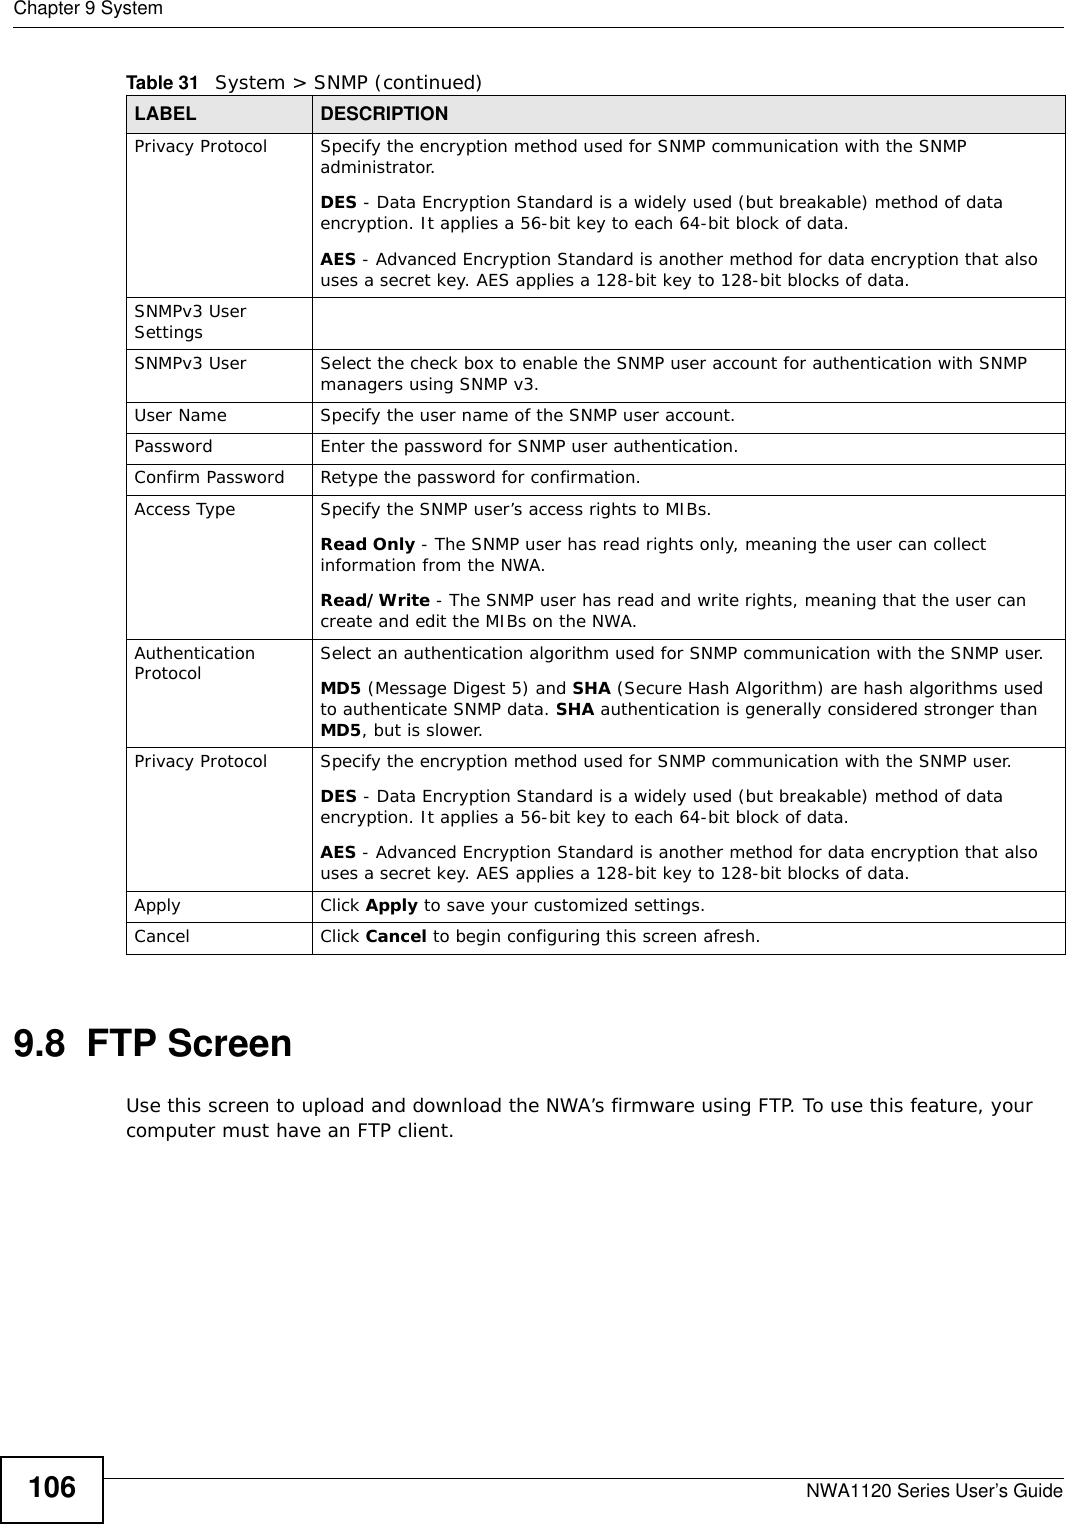 Chapter 9 SystemNWA1120 Series User’s Guide1069.8  FTP ScreenUse this screen to upload and download the NWA’s firmware using FTP. To use this feature, your computer must have an FTP client.Privacy Protocol Specify the encryption method used for SNMP communication with the SNMP administrator. DES - Data Encryption Standard is a widely used (but breakable) method of data encryption. It applies a 56-bit key to each 64-bit block of data.AES - Advanced Encryption Standard is another method for data encryption that also uses a secret key. AES applies a 128-bit key to 128-bit blocks of data.SNMPv3 User Settings SNMPv3 User Select the check box to enable the SNMP user account for authentication with SNMP managers using SNMP v3. User Name Specify the user name of the SNMP user account.Password Enter the password for SNMP user authentication. Confirm Password Retype the password for confirmation.Access Type Specify the SNMP user’s access rights to MIBs.Read Only - The SNMP user has read rights only, meaning the user can collect information from the NWA.Read/Write - The SNMP user has read and write rights, meaning that the user can create and edit the MIBs on the NWA.Authentication Protocol Select an authentication algorithm used for SNMP communication with the SNMP user.MD5 (Message Digest 5) and SHA (Secure Hash Algorithm) are hash algorithms used to authenticate SNMP data. SHA authentication is generally considered stronger than MD5, but is slower. Privacy Protocol Specify the encryption method used for SNMP communication with the SNMP user. DES - Data Encryption Standard is a widely used (but breakable) method of data encryption. It applies a 56-bit key to each 64-bit block of data.AES - Advanced Encryption Standard is another method for data encryption that also uses a secret key. AES applies a 128-bit key to 128-bit blocks of data.Apply Click Apply to save your customized settings. Cancel Click Cancel to begin configuring this screen afresh.Table 31   System &gt; SNMP (continued)LABEL DESCRIPTION